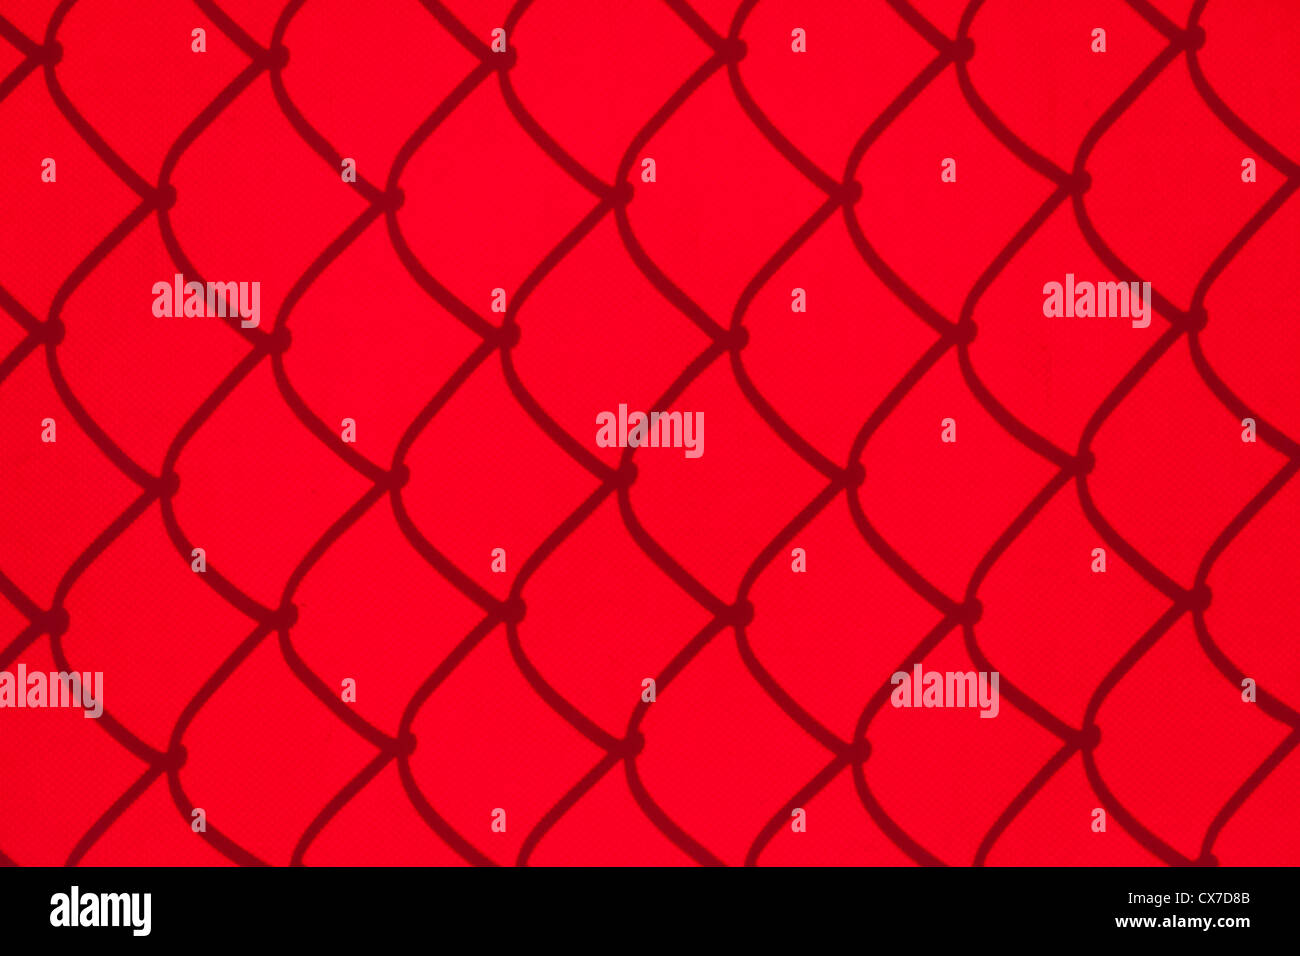 Chainlink Fence Shadow on red Shade Cloth Stock Photo